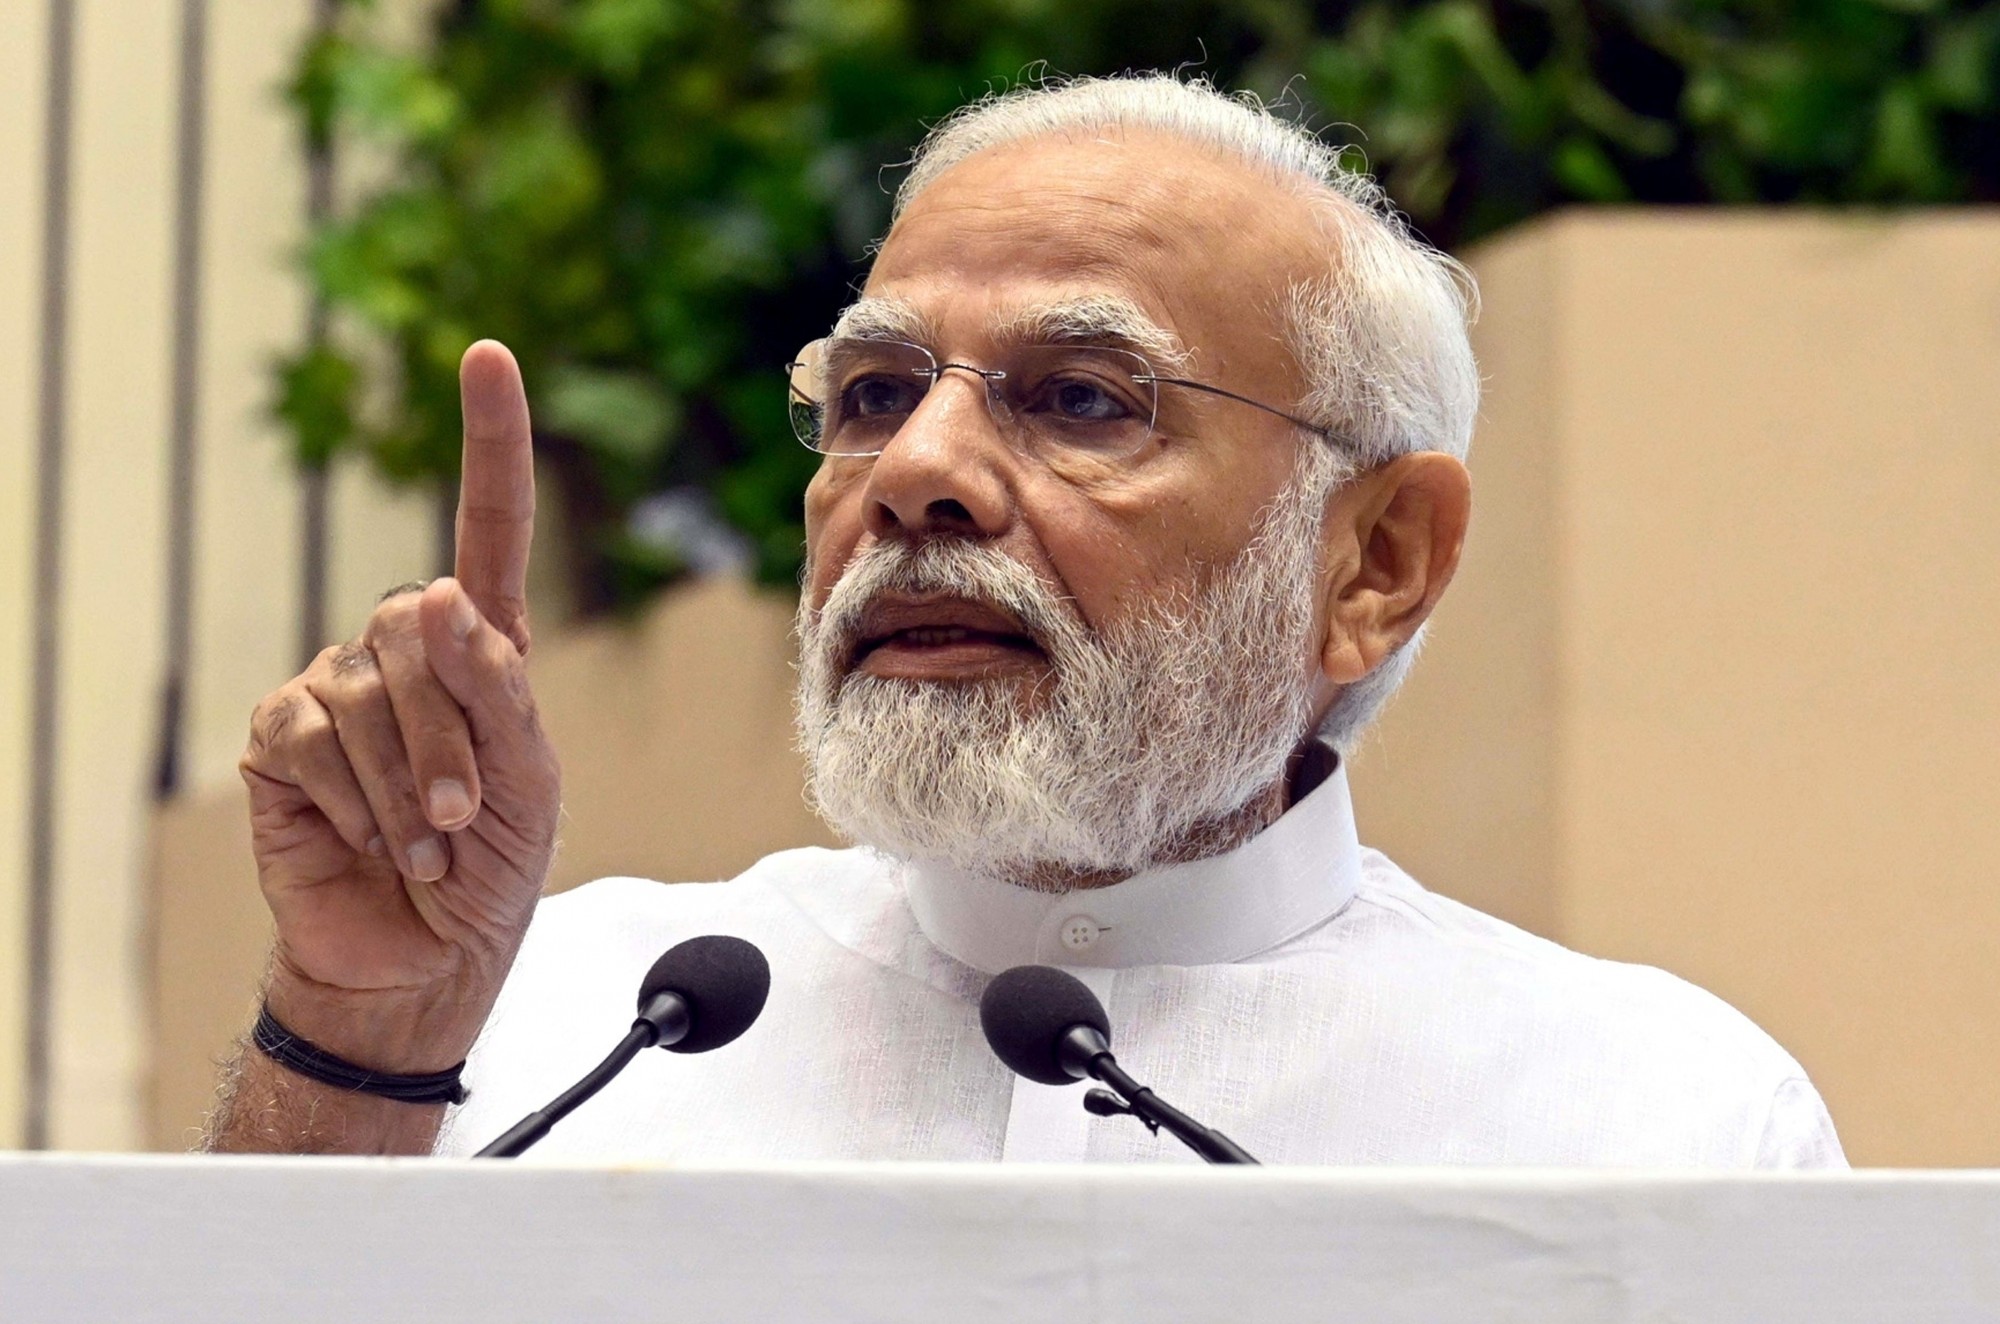 PM Modi Emerges as the World's Most Popular Leader with a 76% Approval Rating